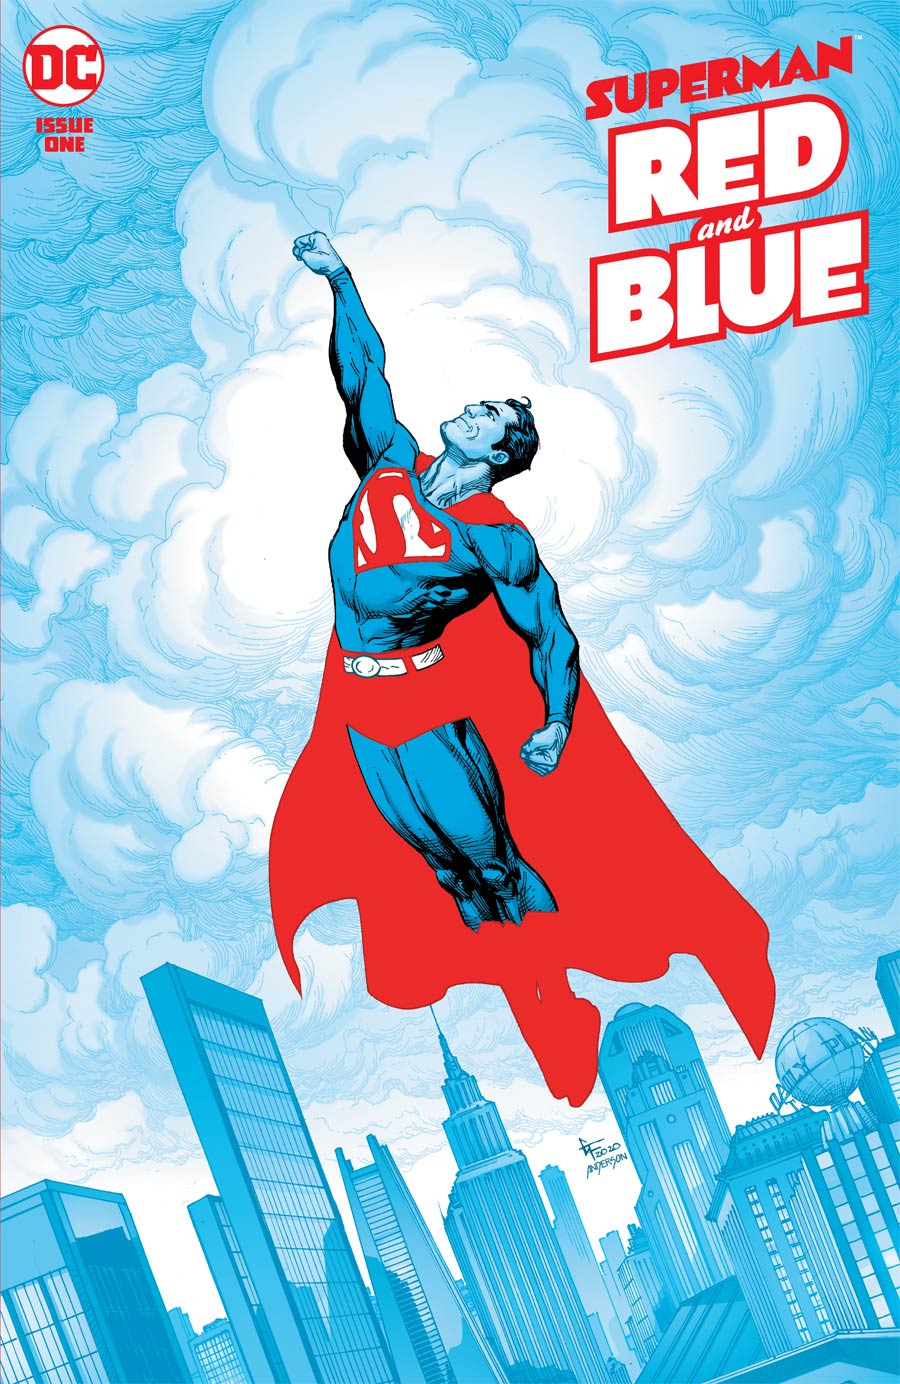 Superman: Red and Blue #1